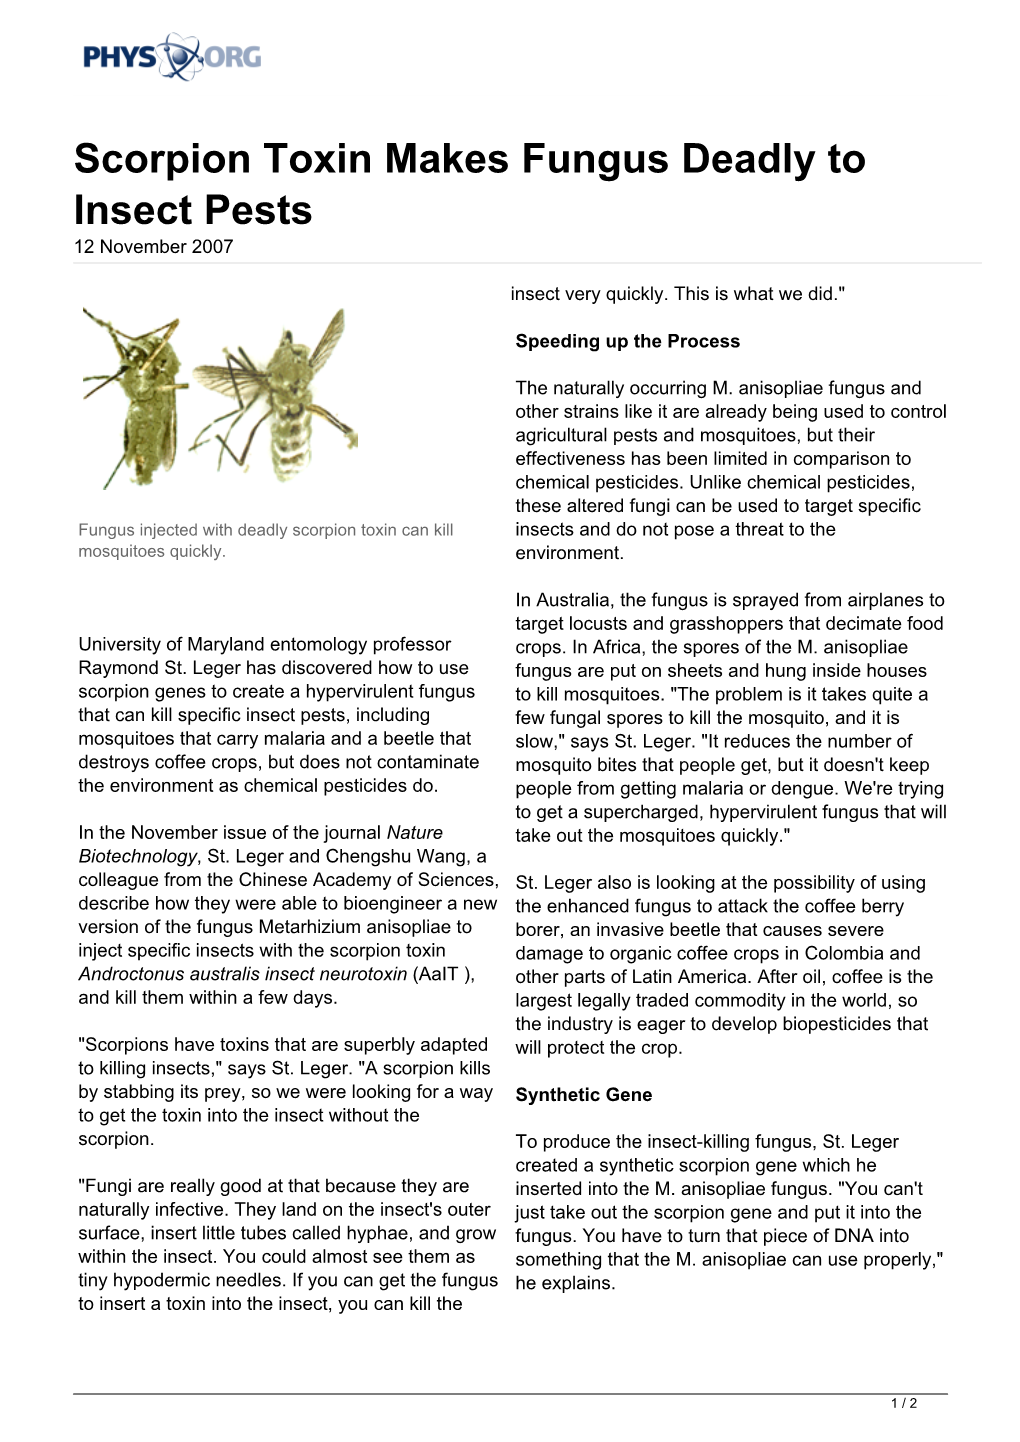 Scorpion Toxin Makes Fungus Deadly to Insect Pests 12 November 2007